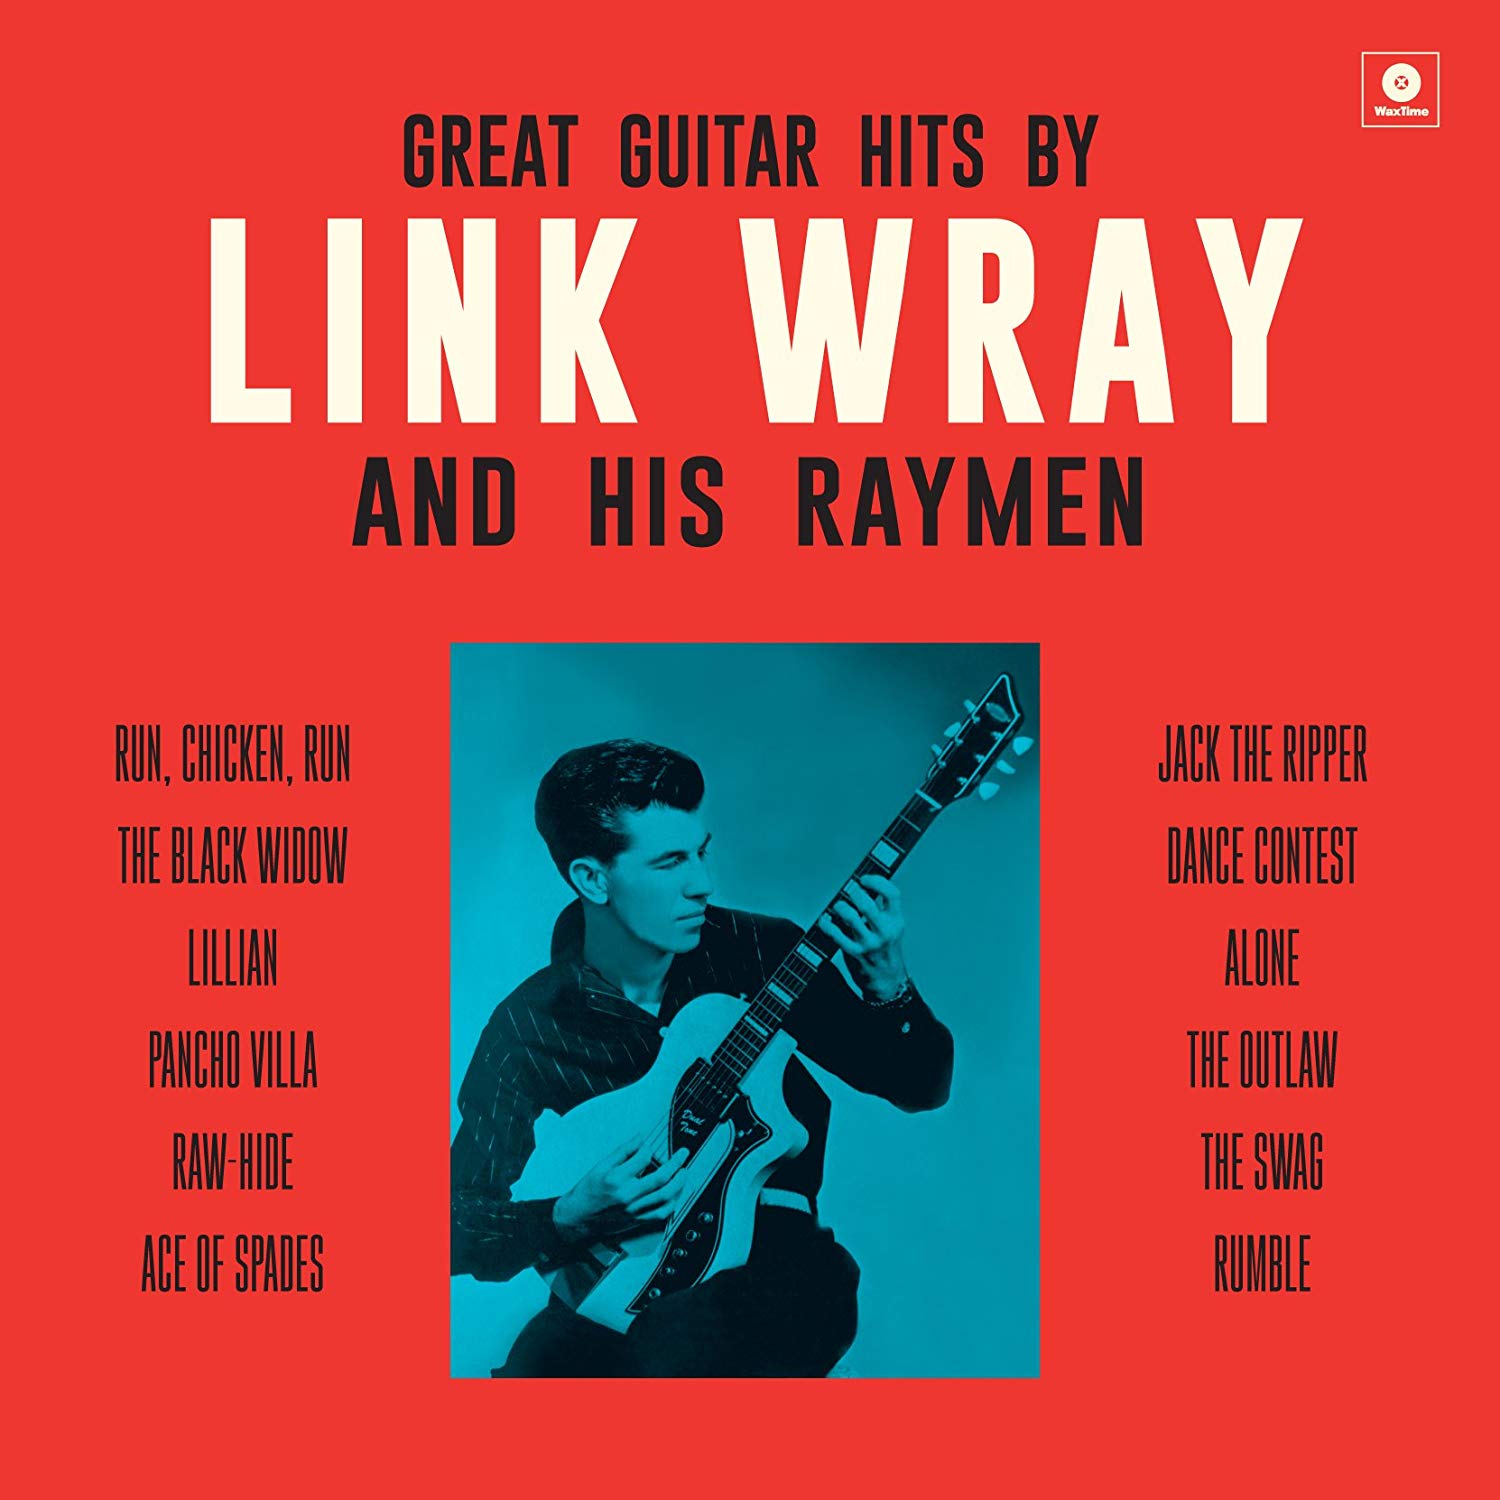 LINK WRAY & THE WRAYMEN / リンク・レイ・アンド・ザ・レイメン / GREAT GUITAR HITS BY LINK WRAY & HIS RAYMEN (180G LP)